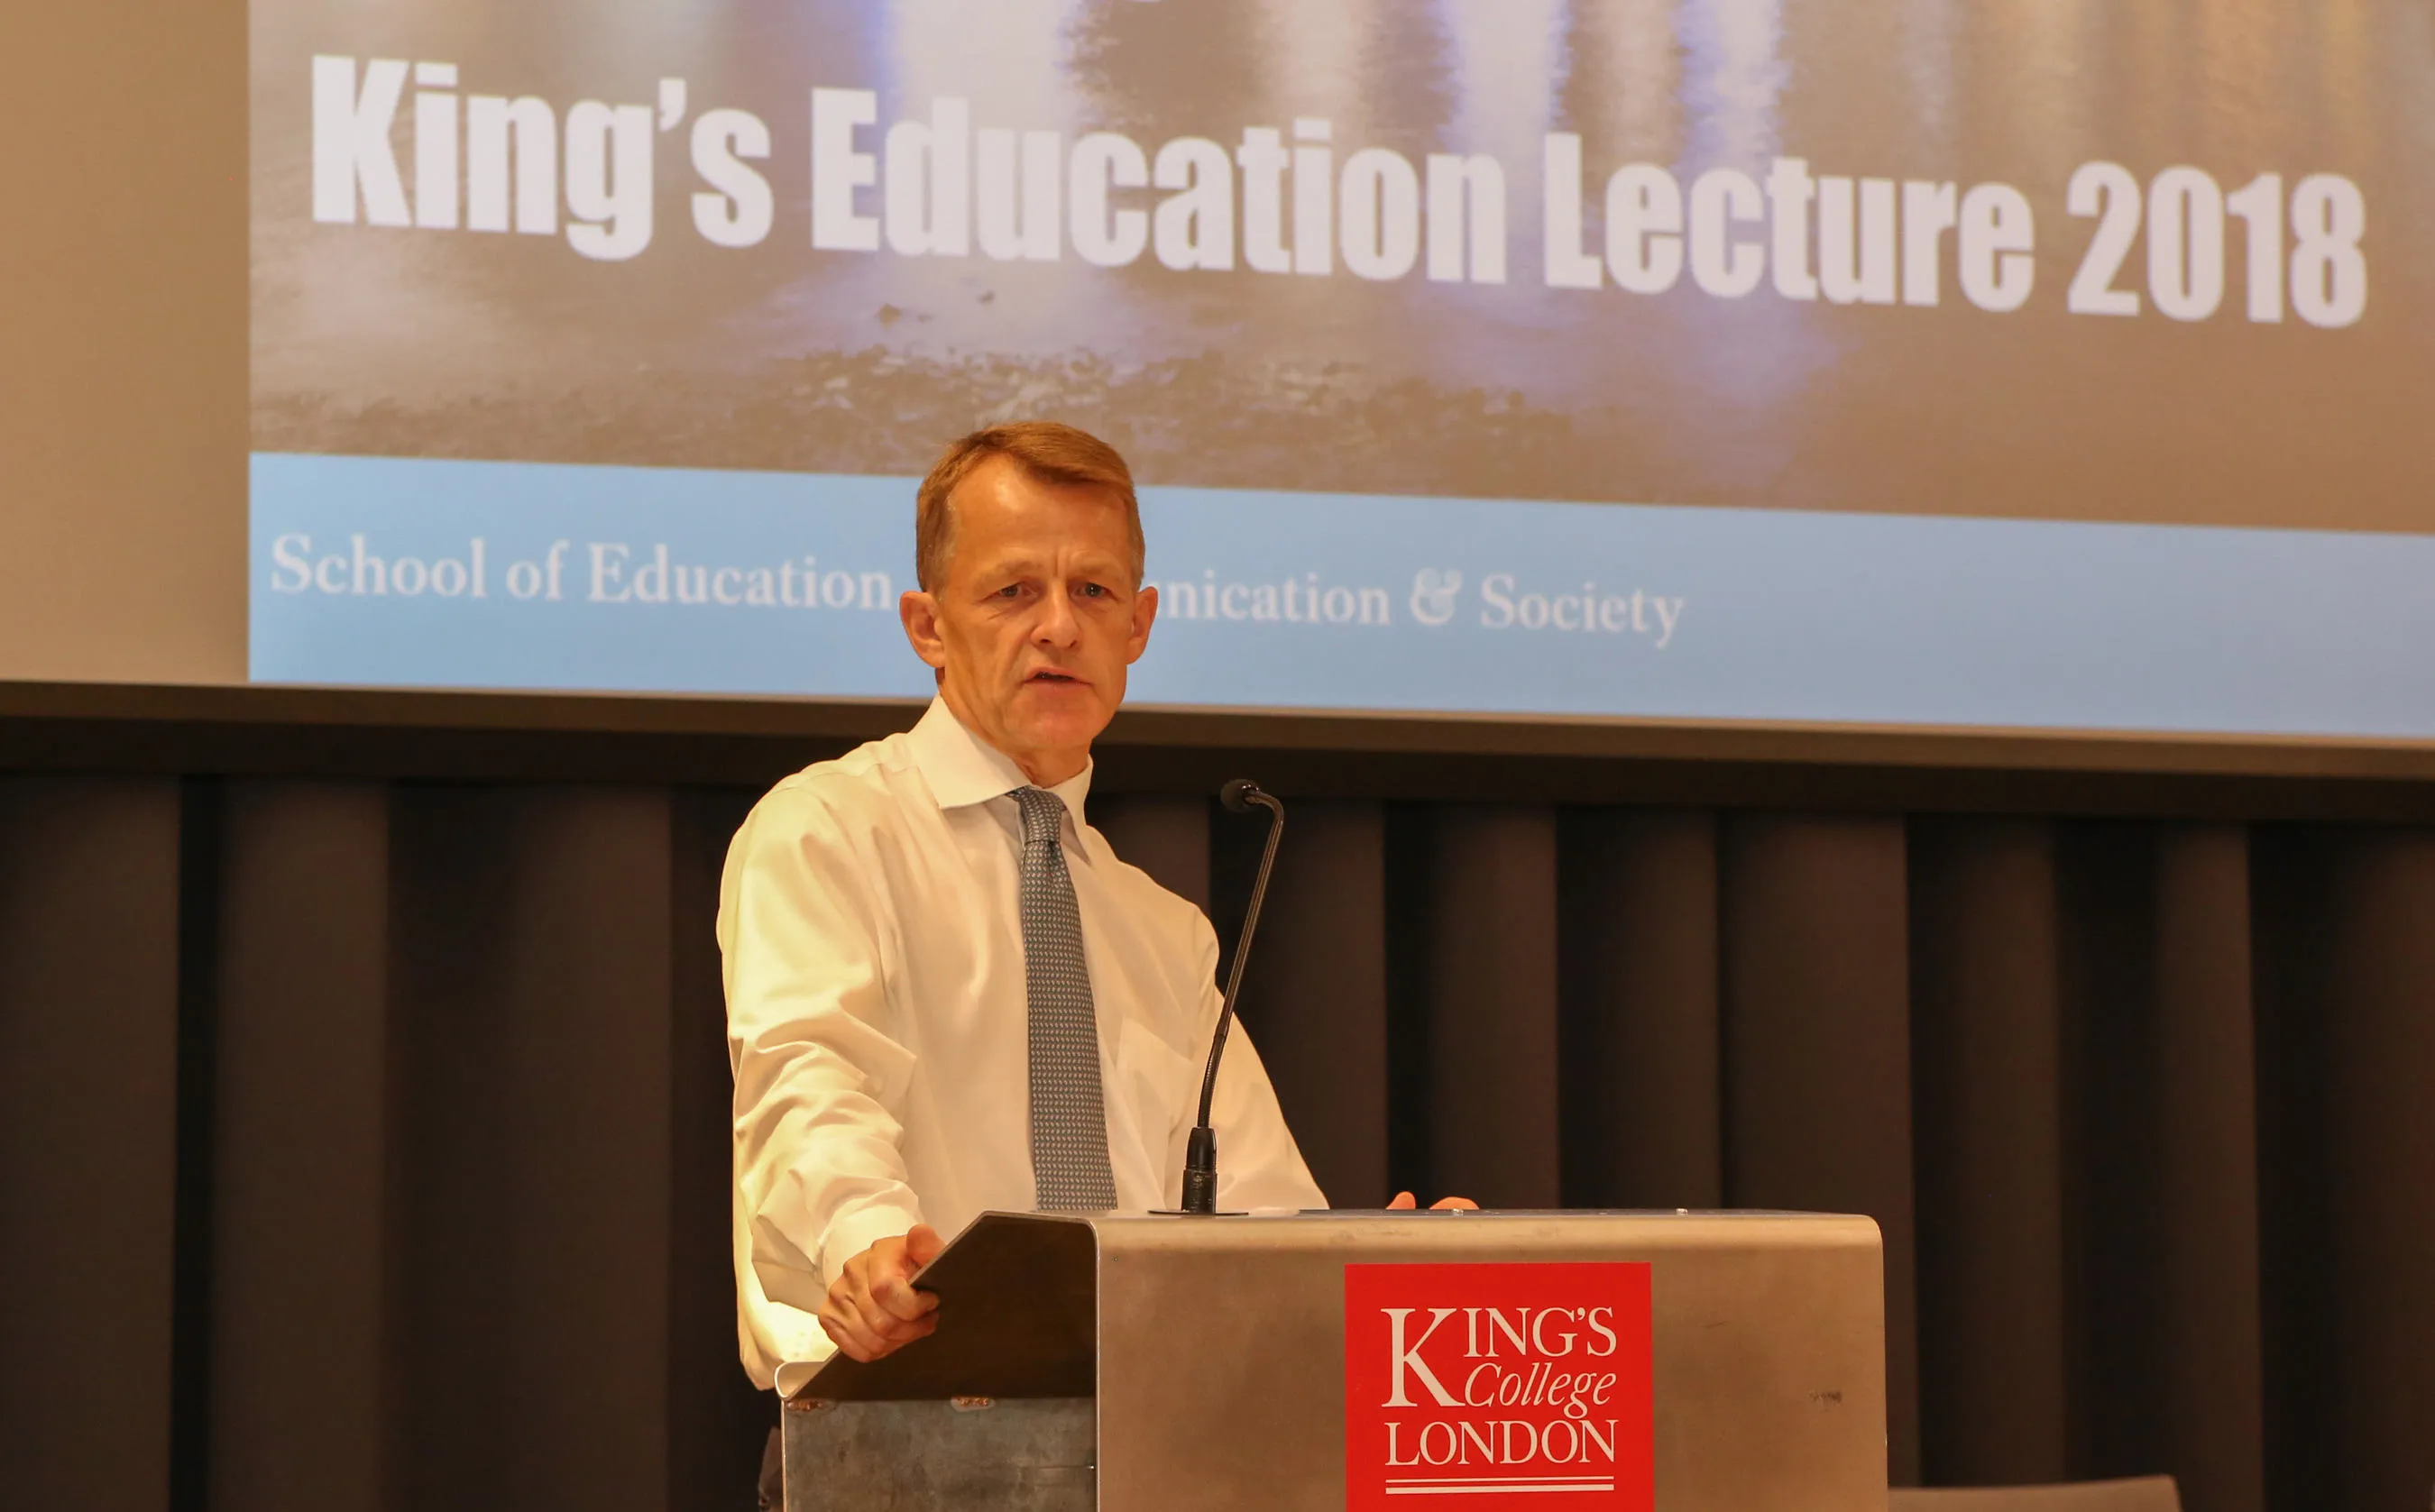 David Laws delivers the King's Education Lecture 2018